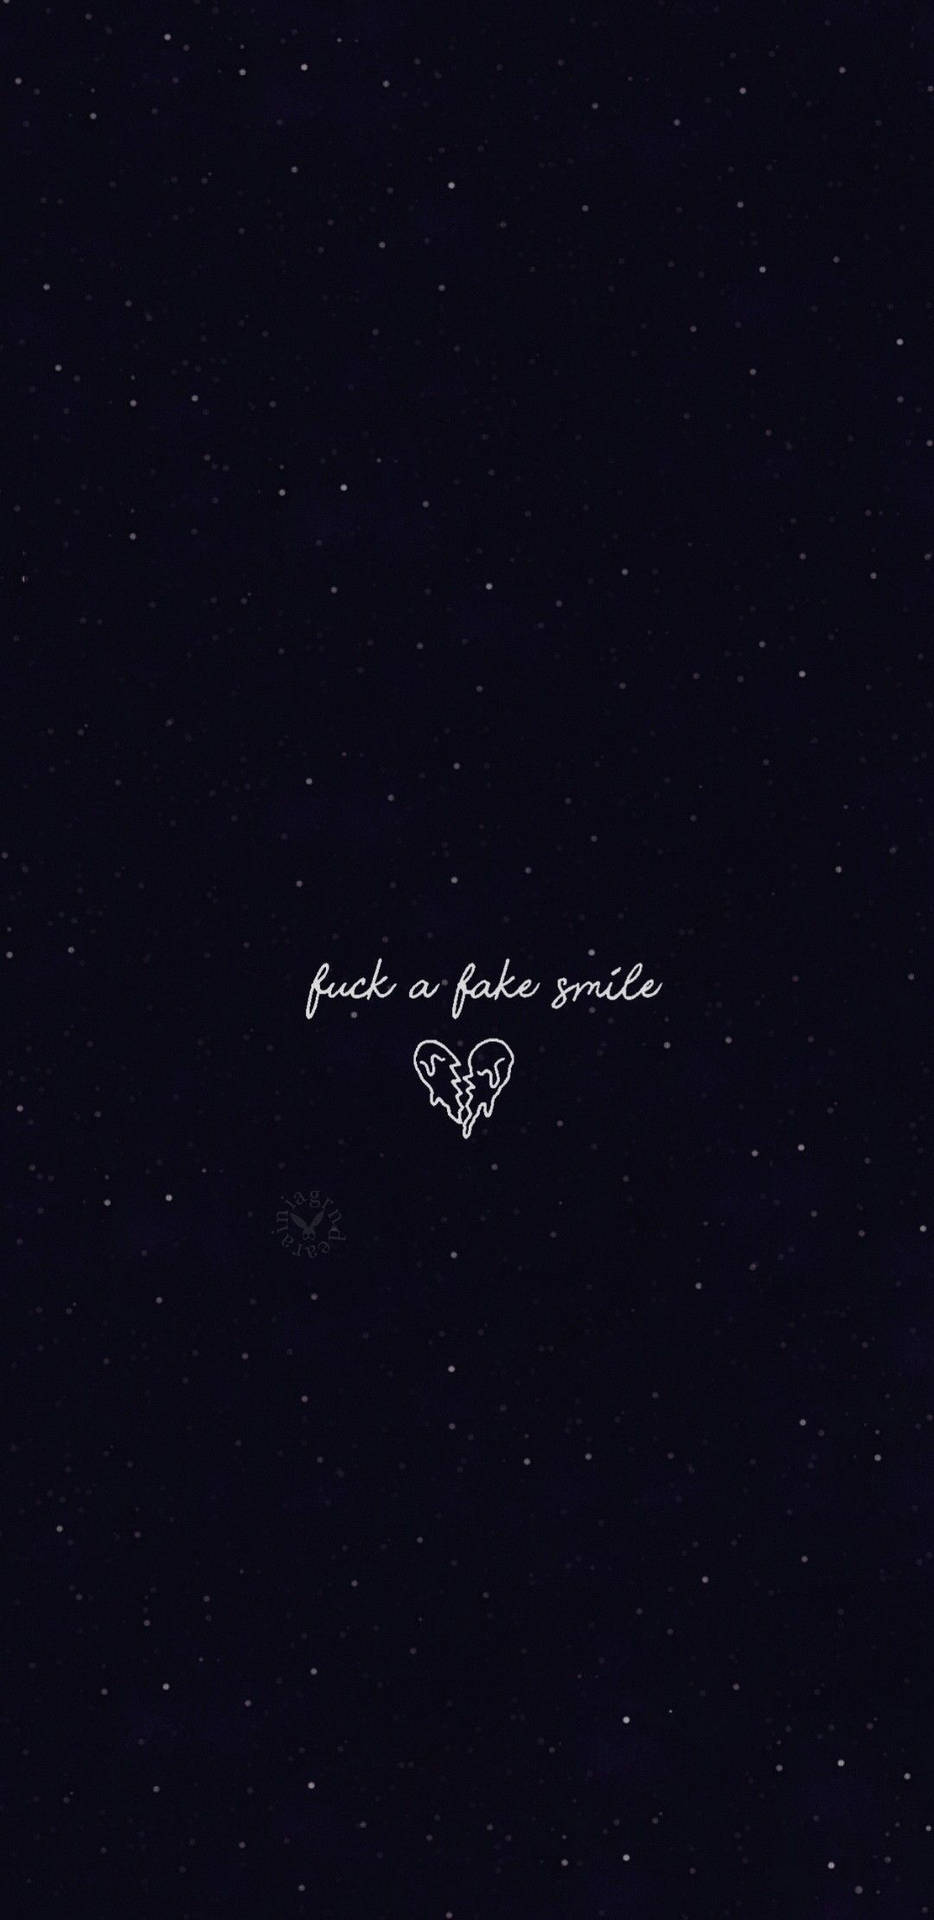 Download A Black Background With The Words'fear In Love'written On ...